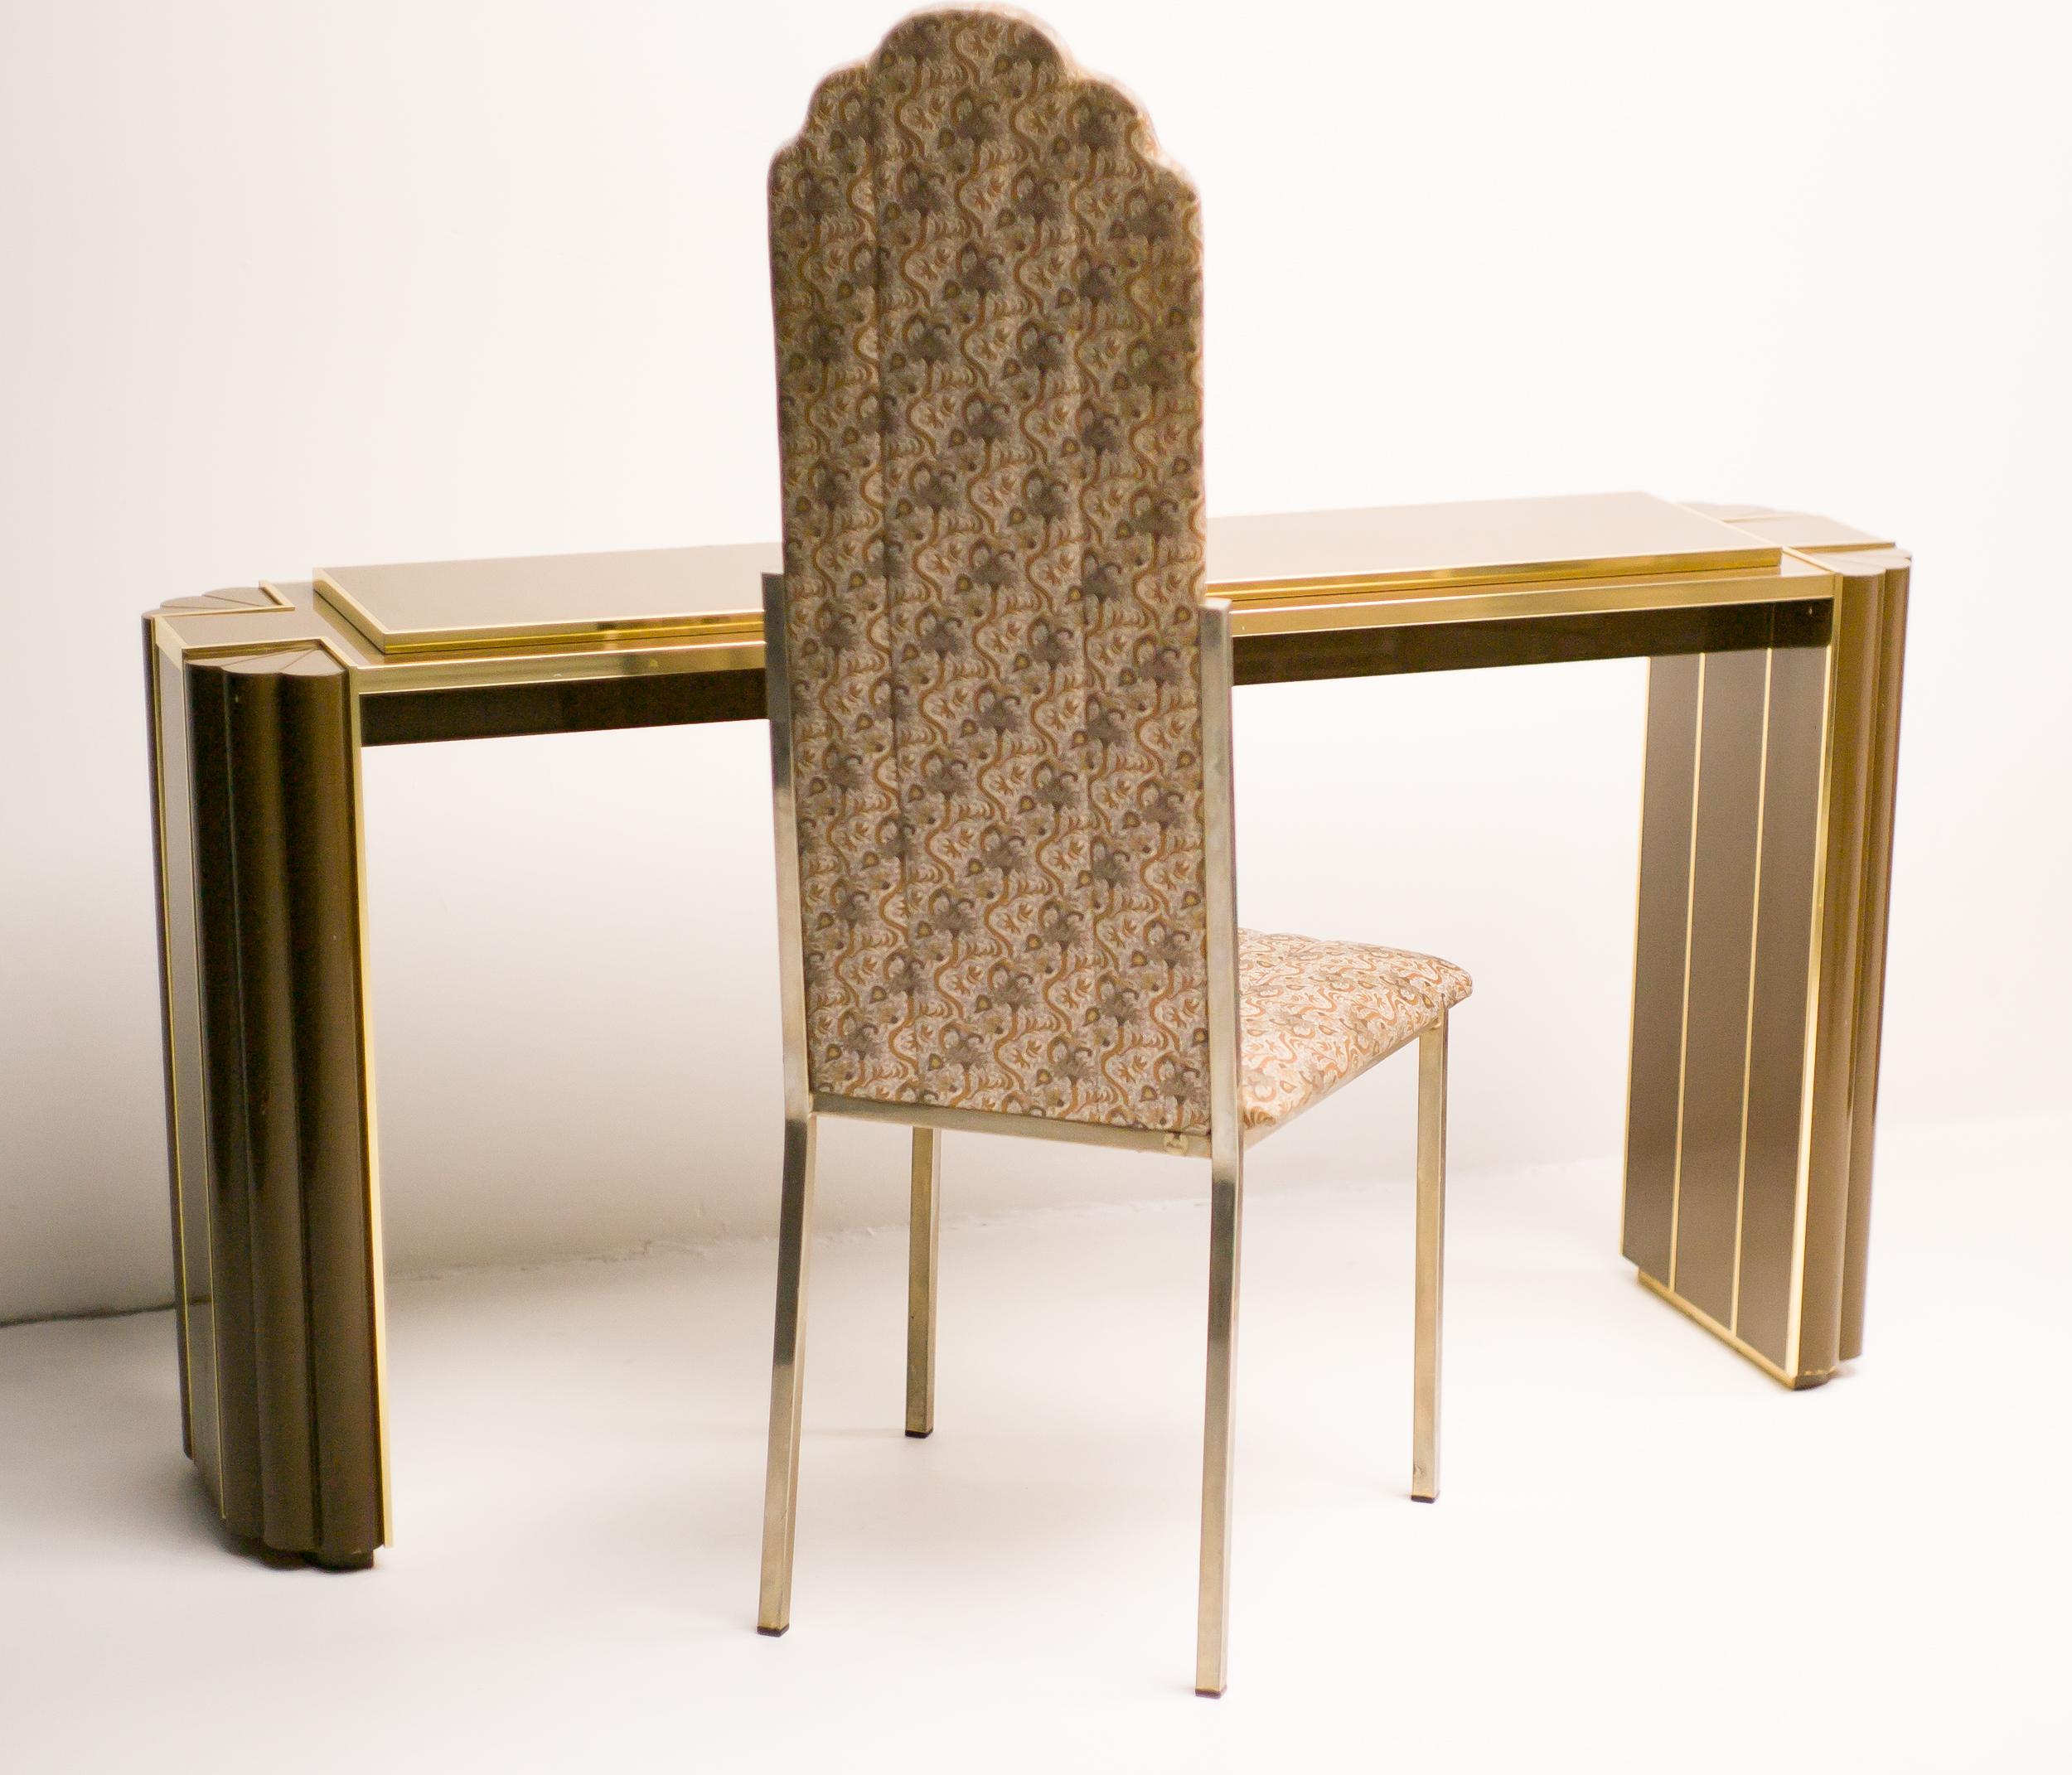 Faceted Spectacular Alain Delon Dining Room Set